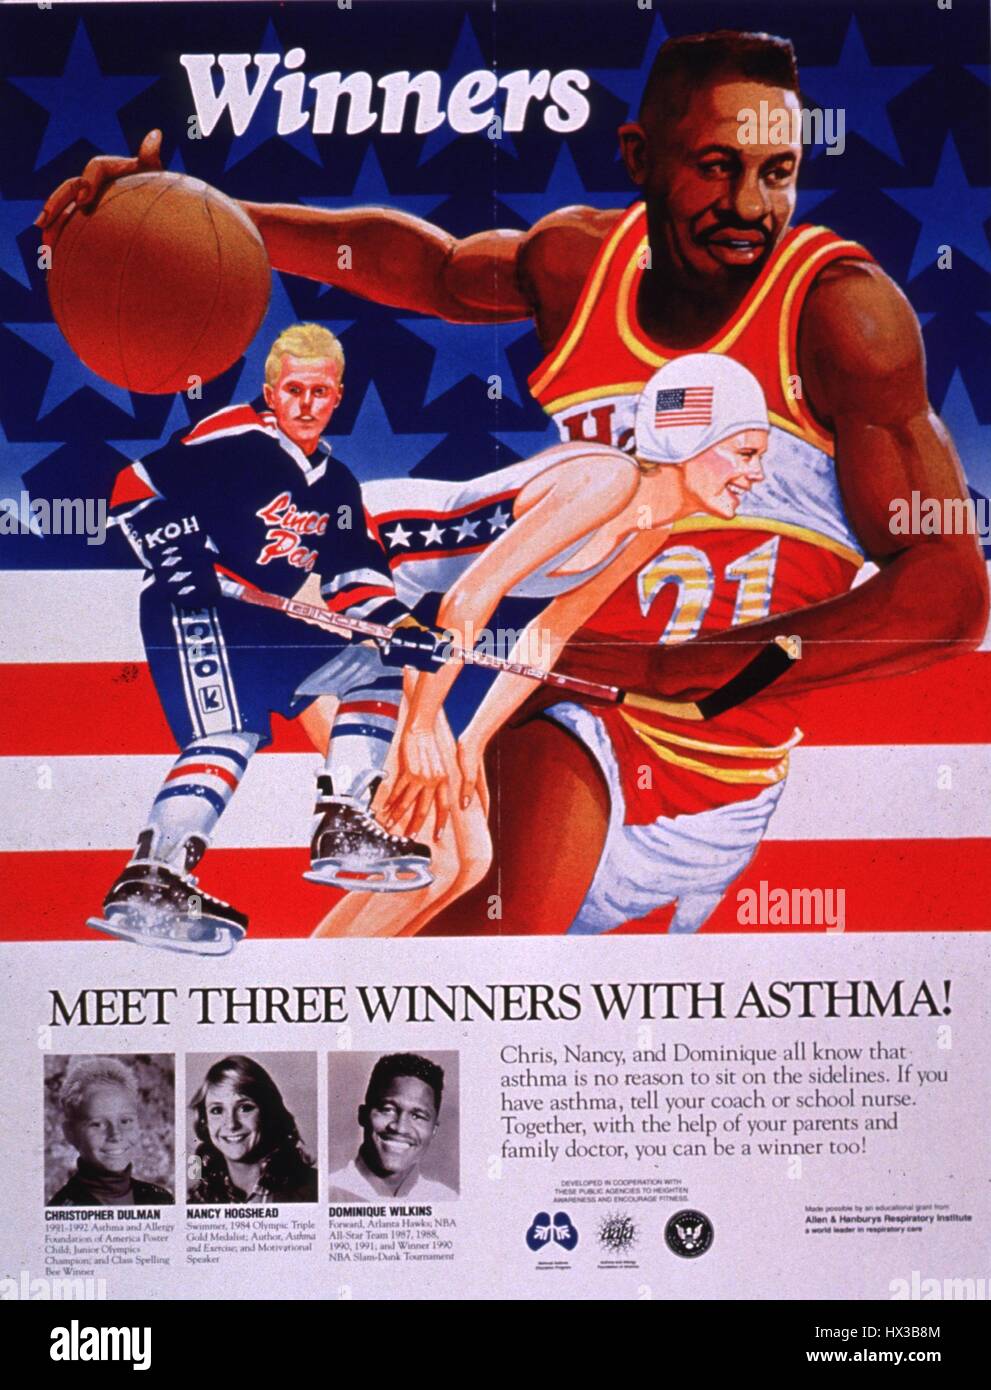 Poster issued by the National Asthma Education Program, depicting three athletes with asthma (ice hockey player Christopher Dulman, basketball player Dominique Wilkins, and swimmer Nancy Hogshead) in front of an American flag, encouraging those with asthma to tell their health care providers and ask for help, 1991. Courtesy National Library of Medicine. Stock Photo